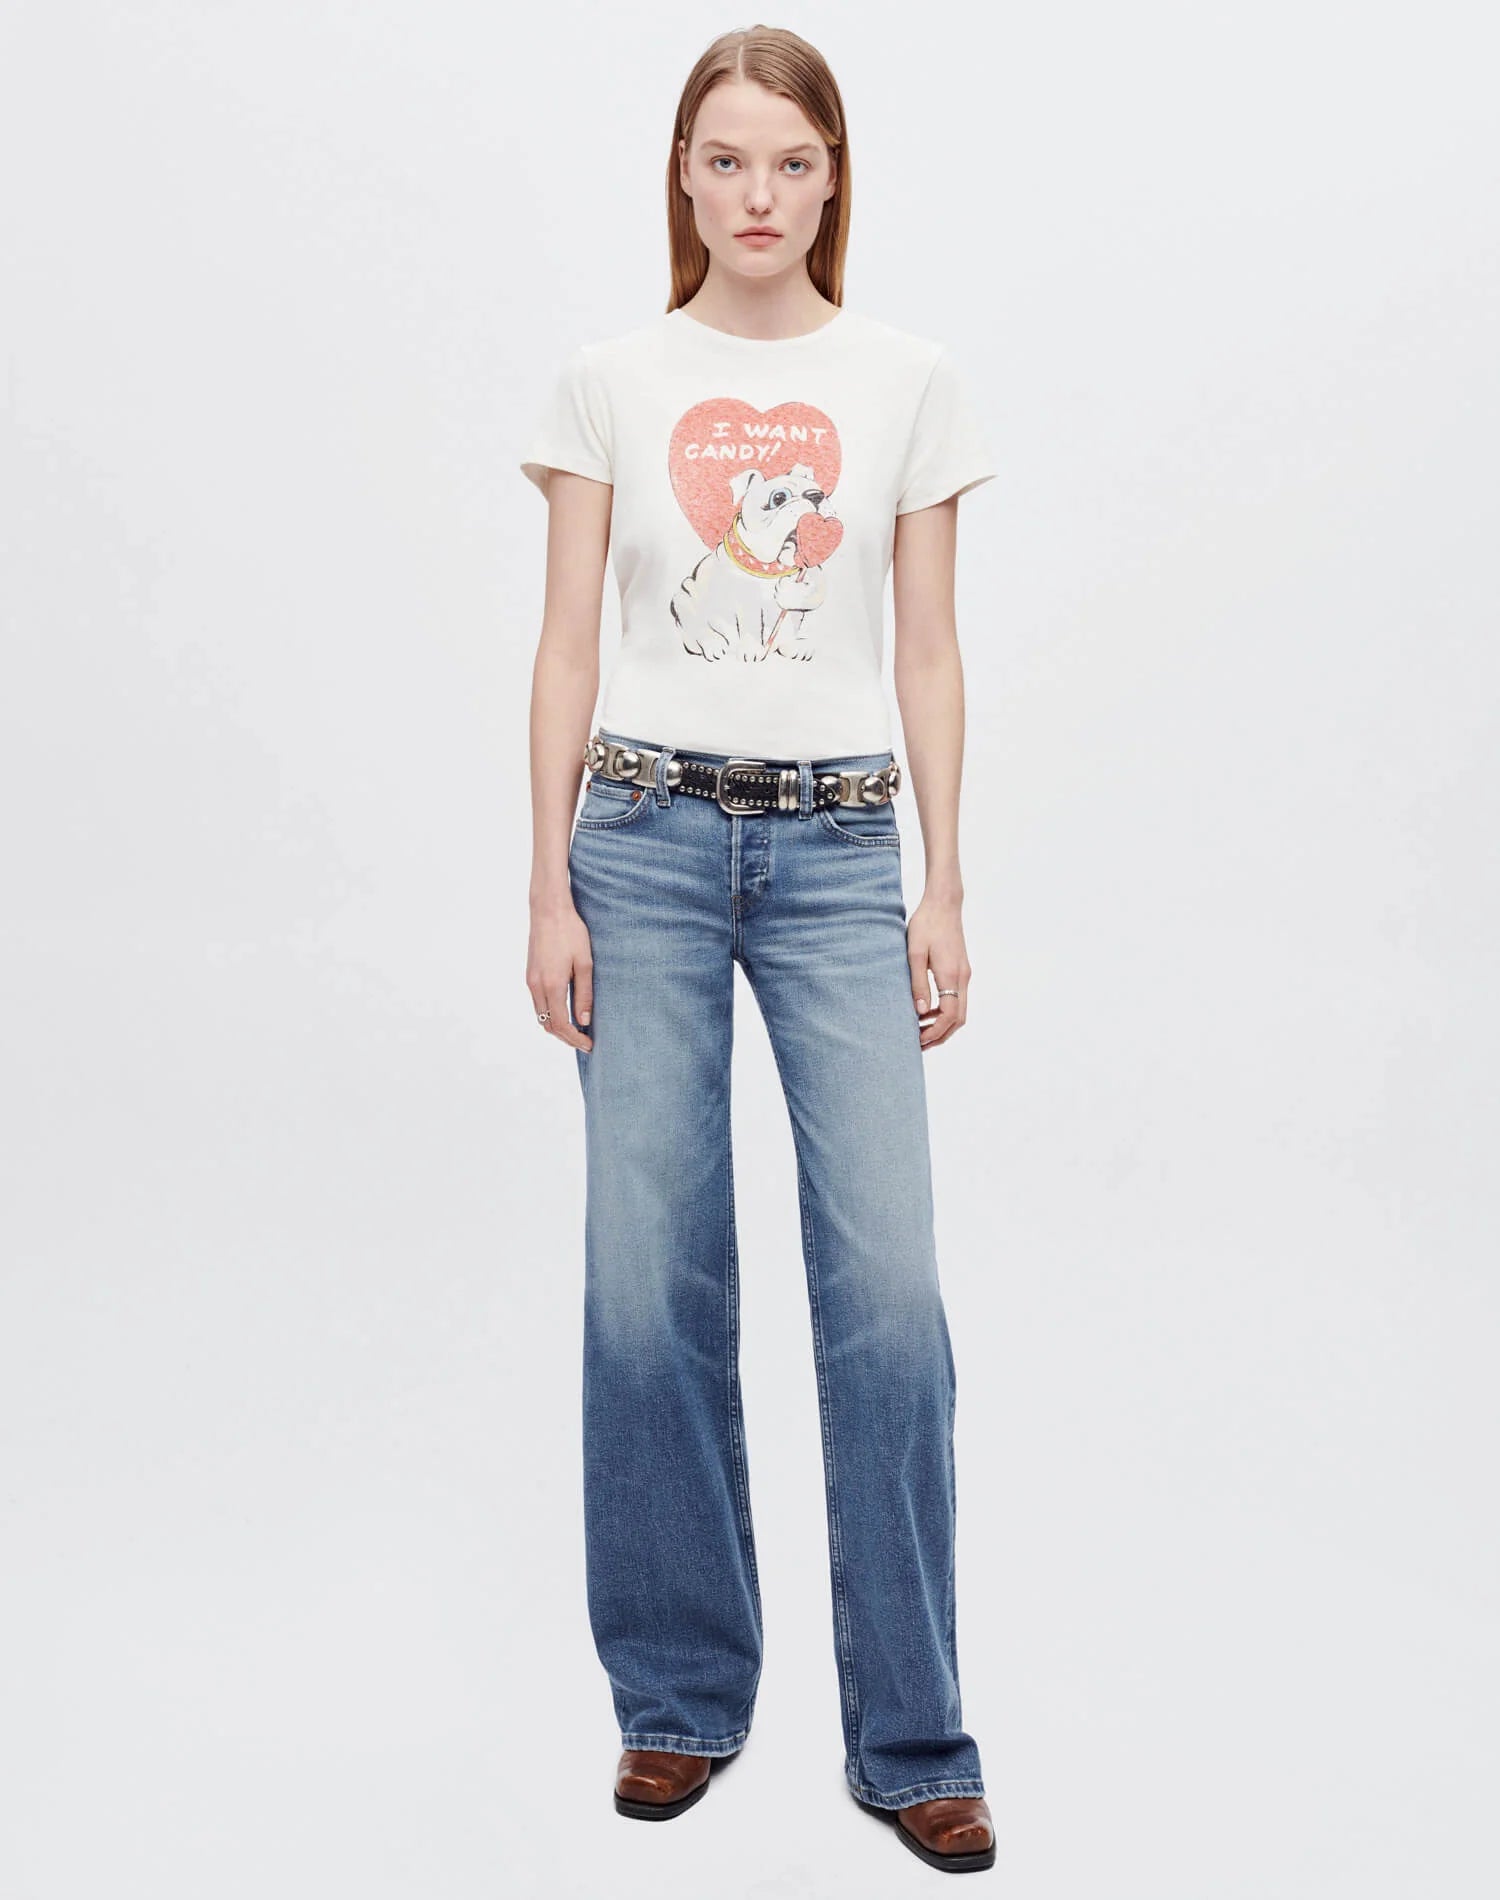 Re/Done Mid Rise Wide Leg Jeans